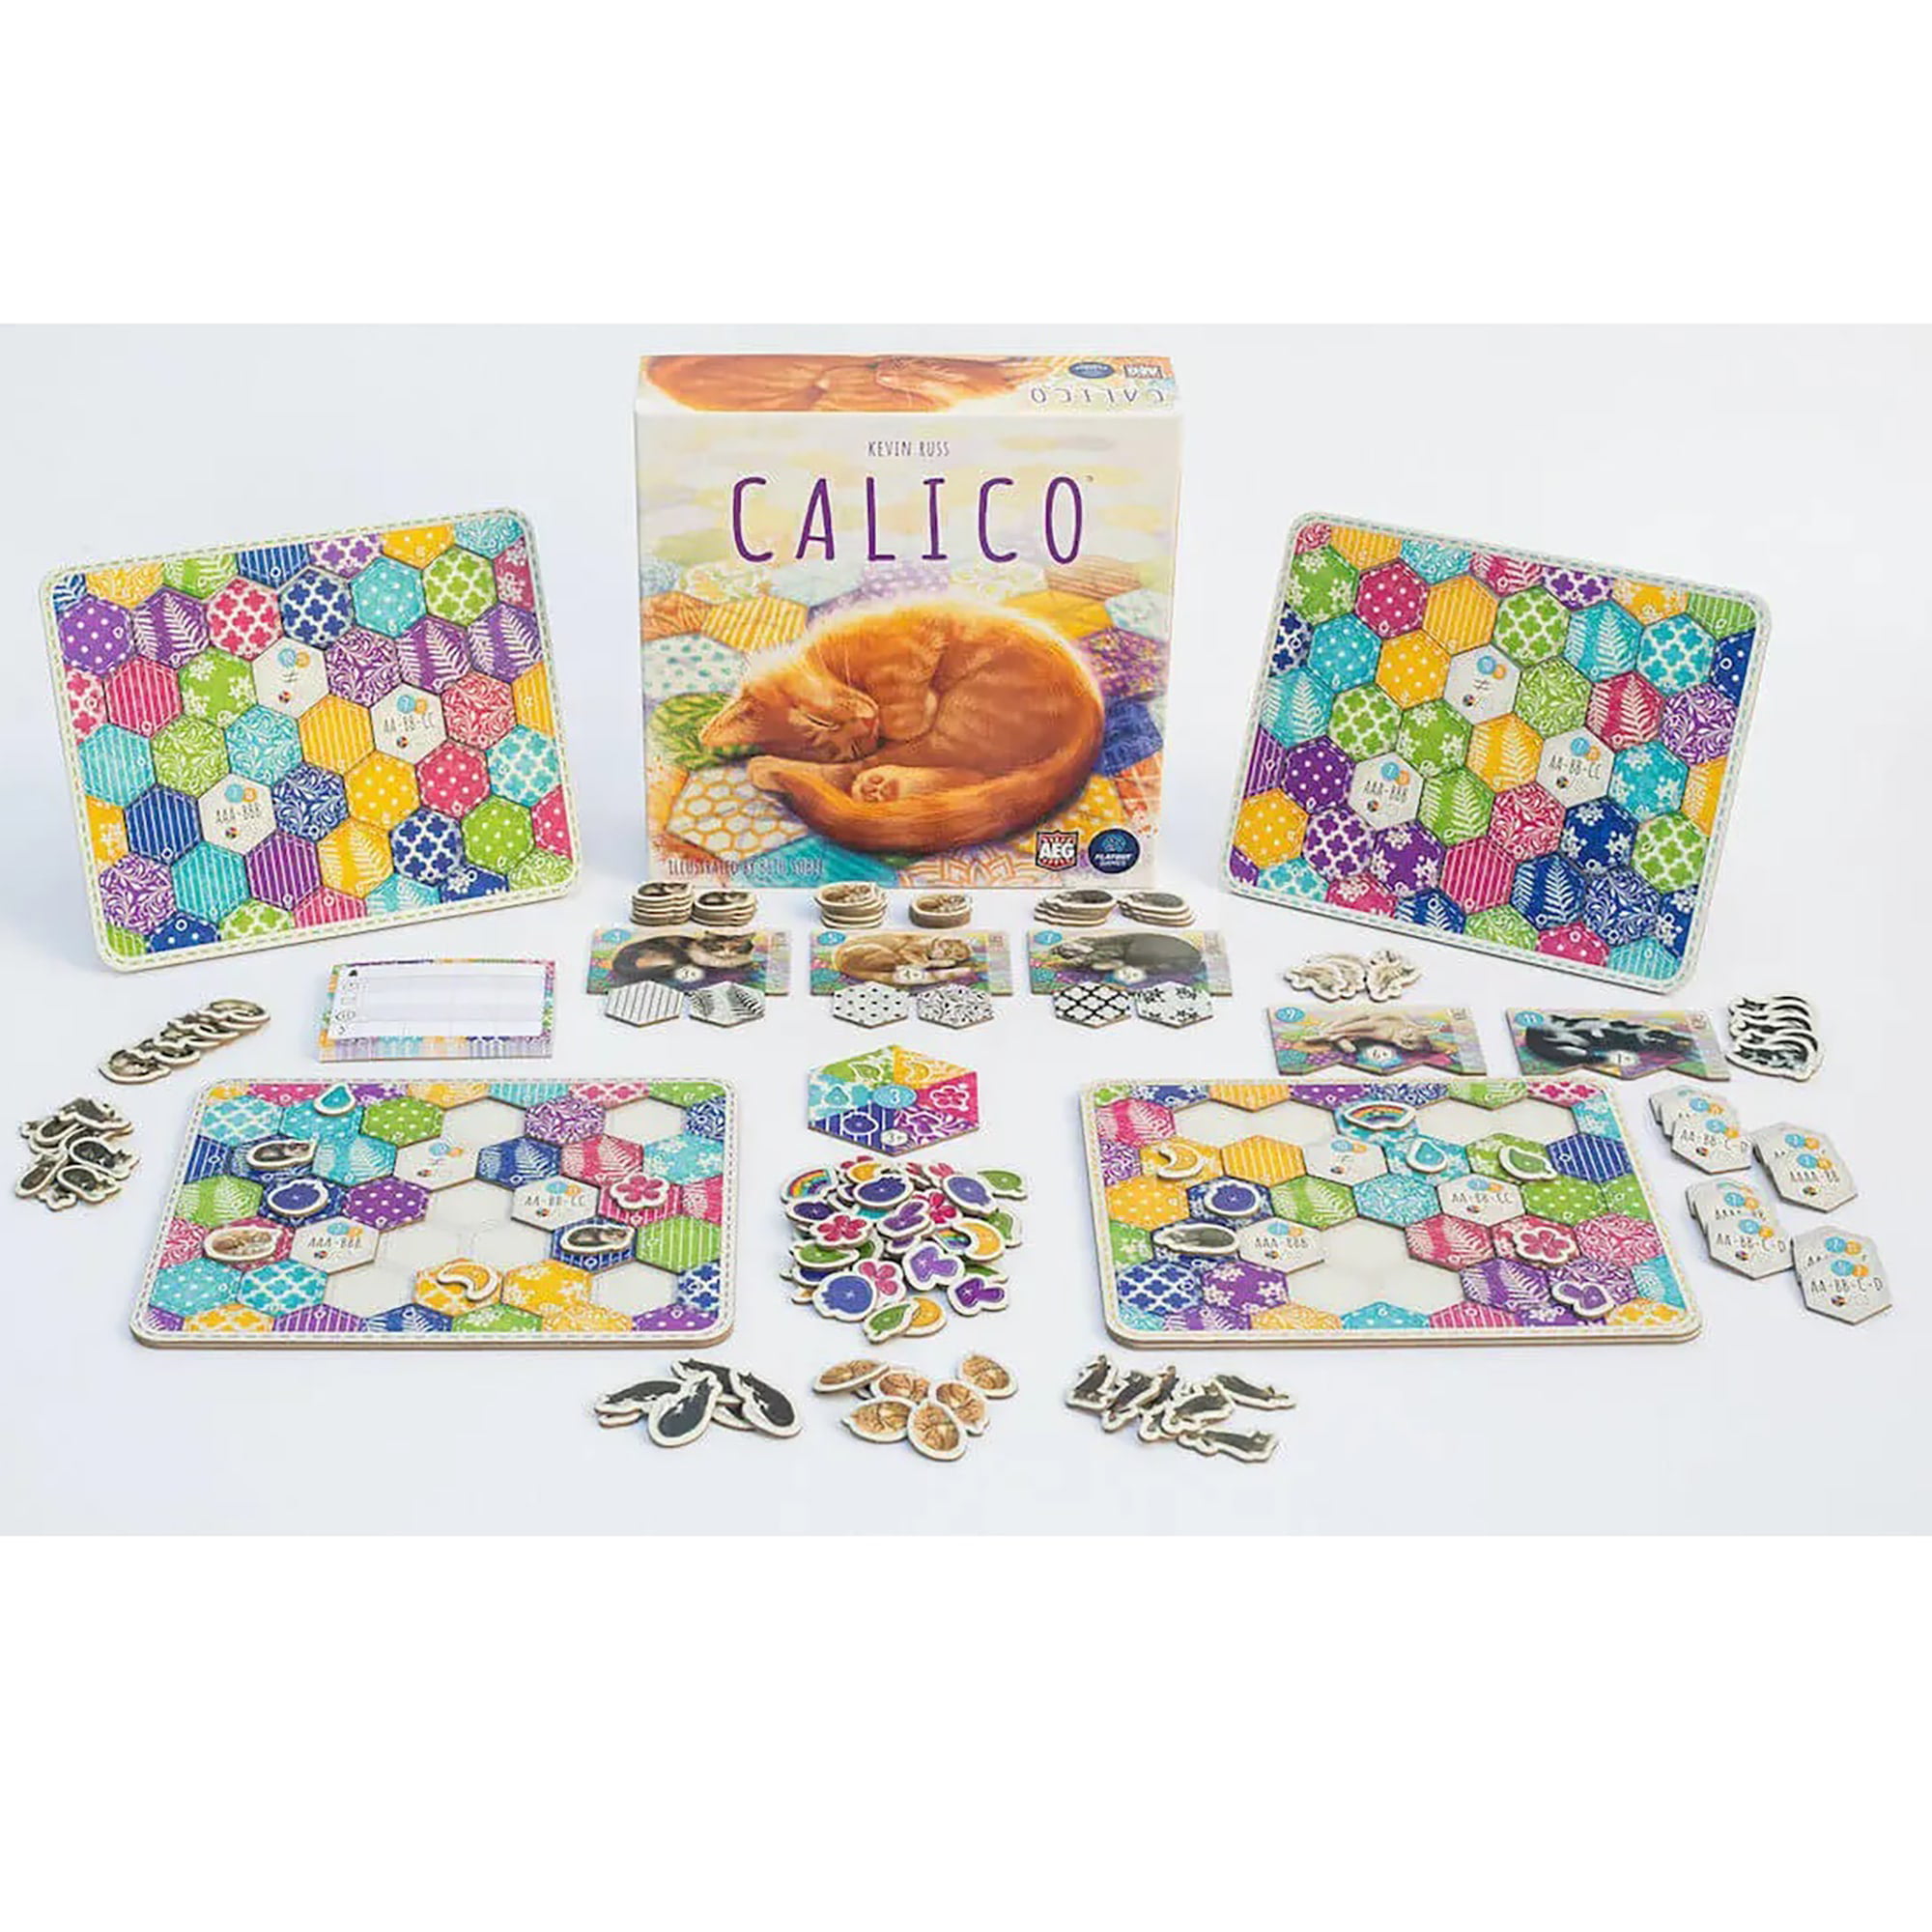 Buy Calico Board Game, Award Winning Strategy Game, Sew Your Quilt to Score  Points, Family Fun, Easy to Learn, Solo Play, Ages 8+, 1-4 Players, 30-45  Min, Flatout Games, Alderac Entertainment Group (